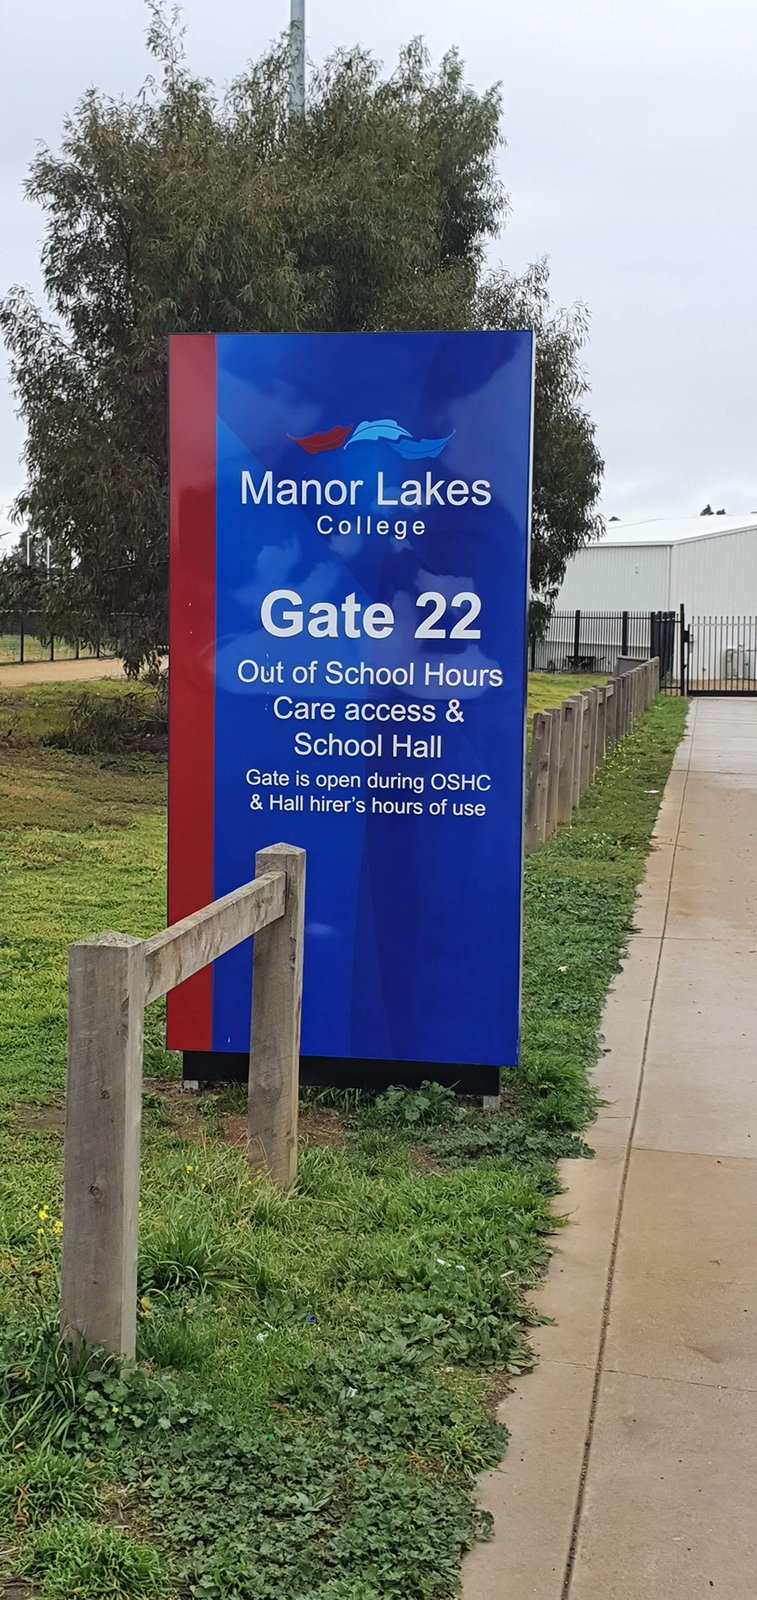 Manor Lakes College